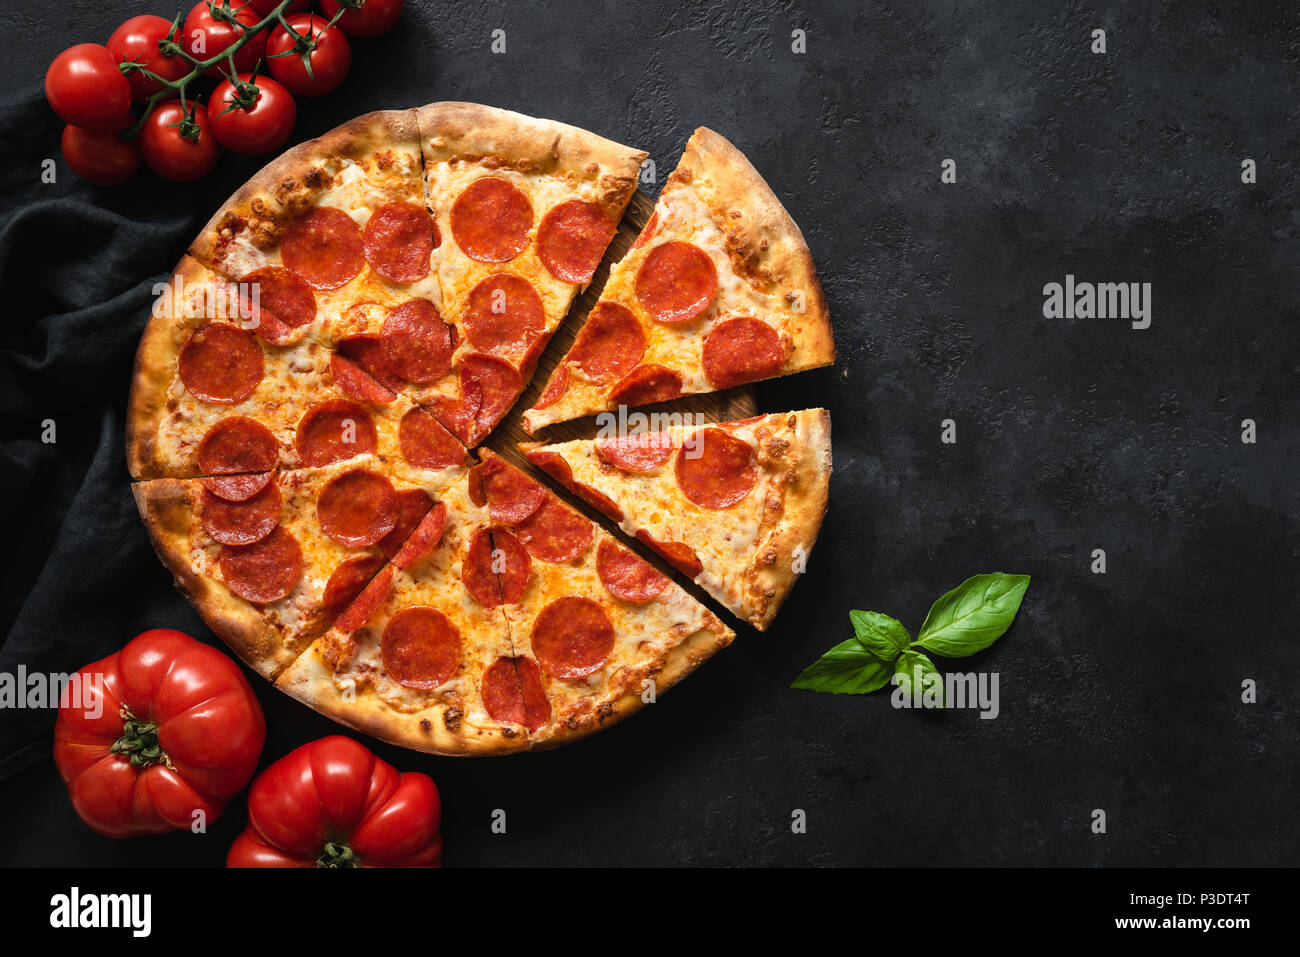 Pepperoni pizza on black concrete background. Top view with copy space. Tasty sliced pepperoni pizza Stock Photo